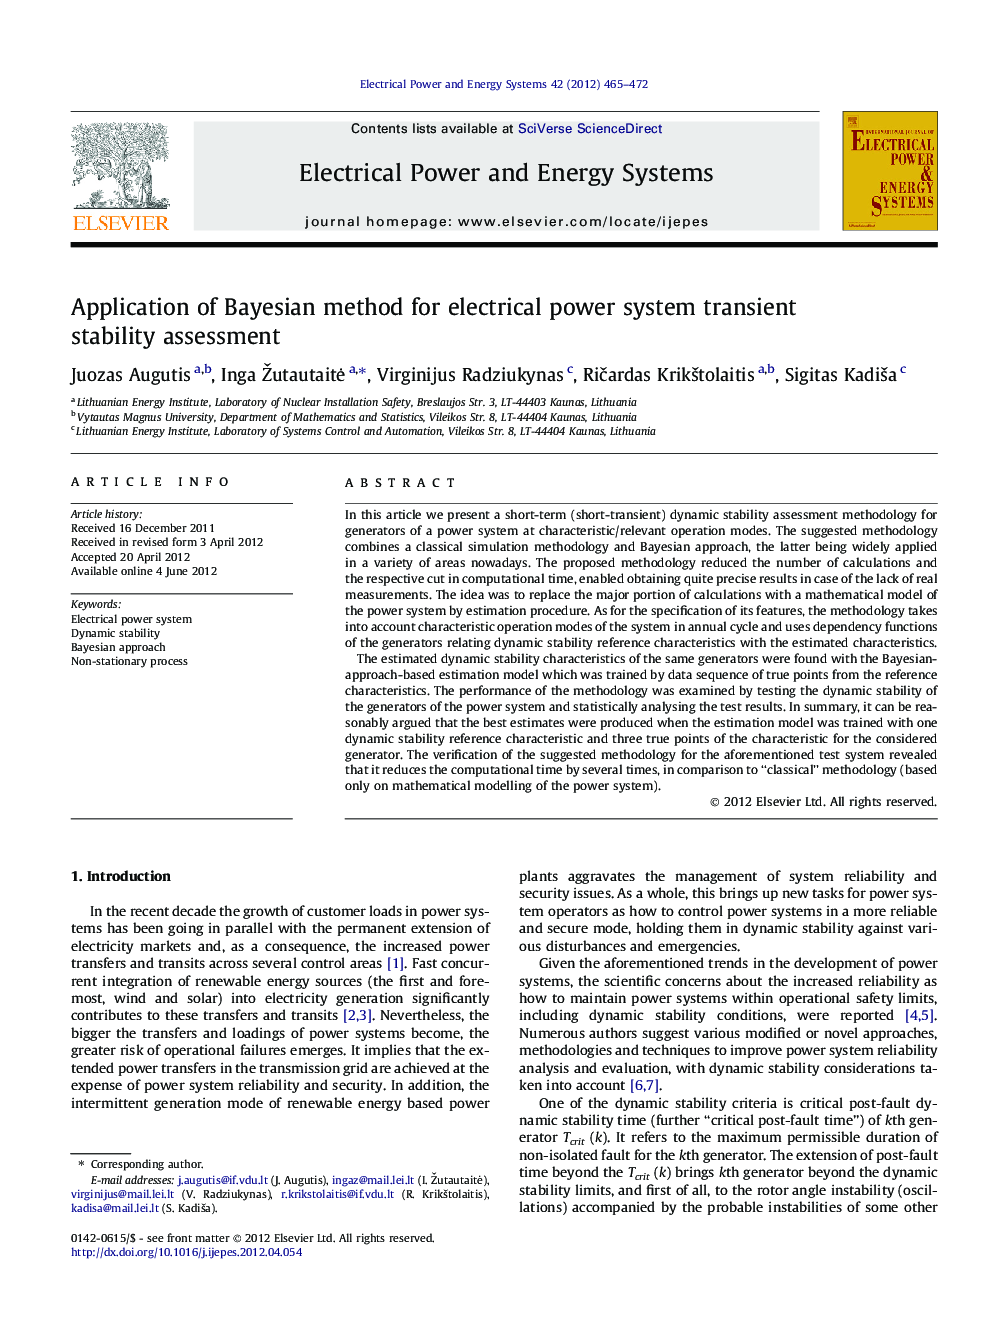 Application of Bayesian method for electrical power system transient stability assessment